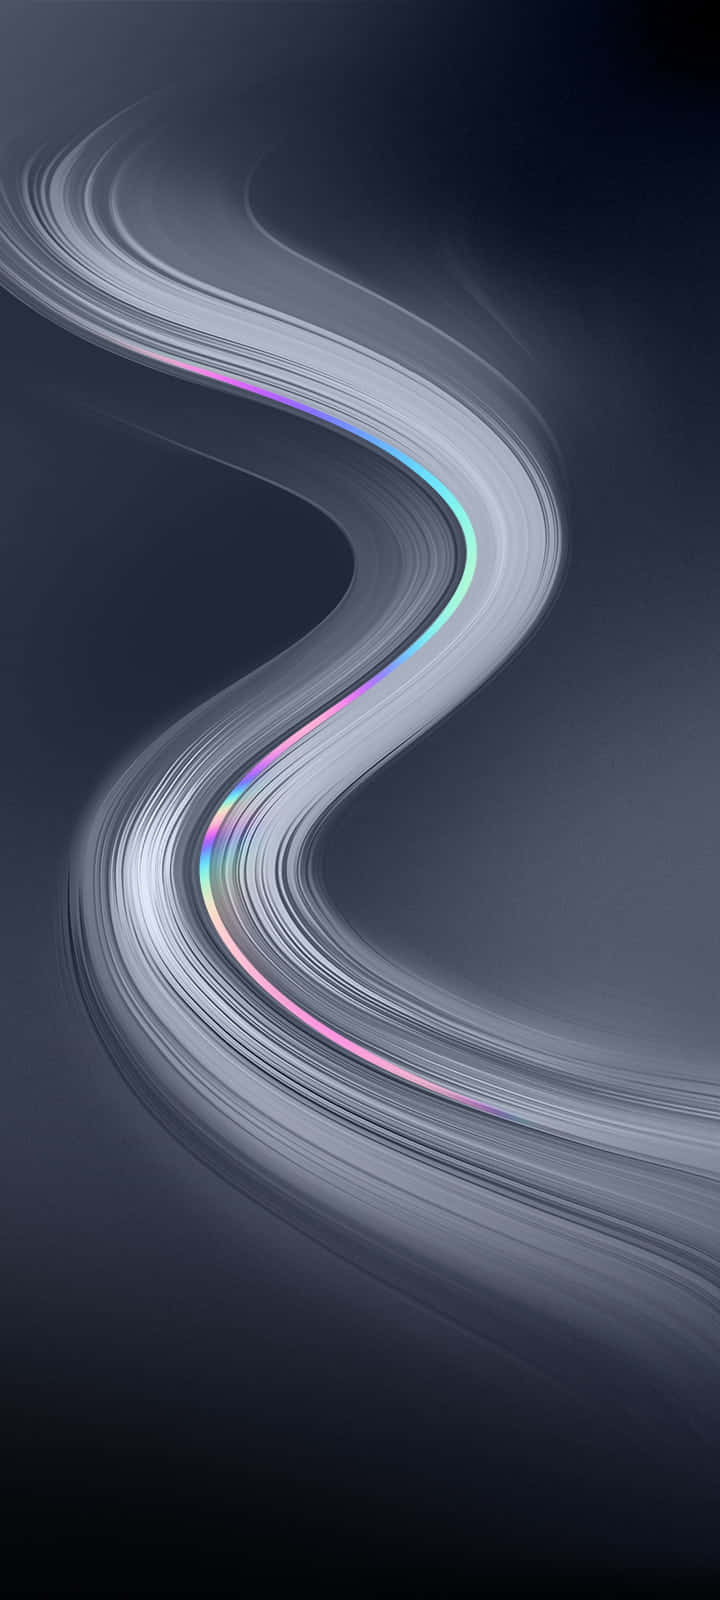 Wavy background pattern of vibrant colors